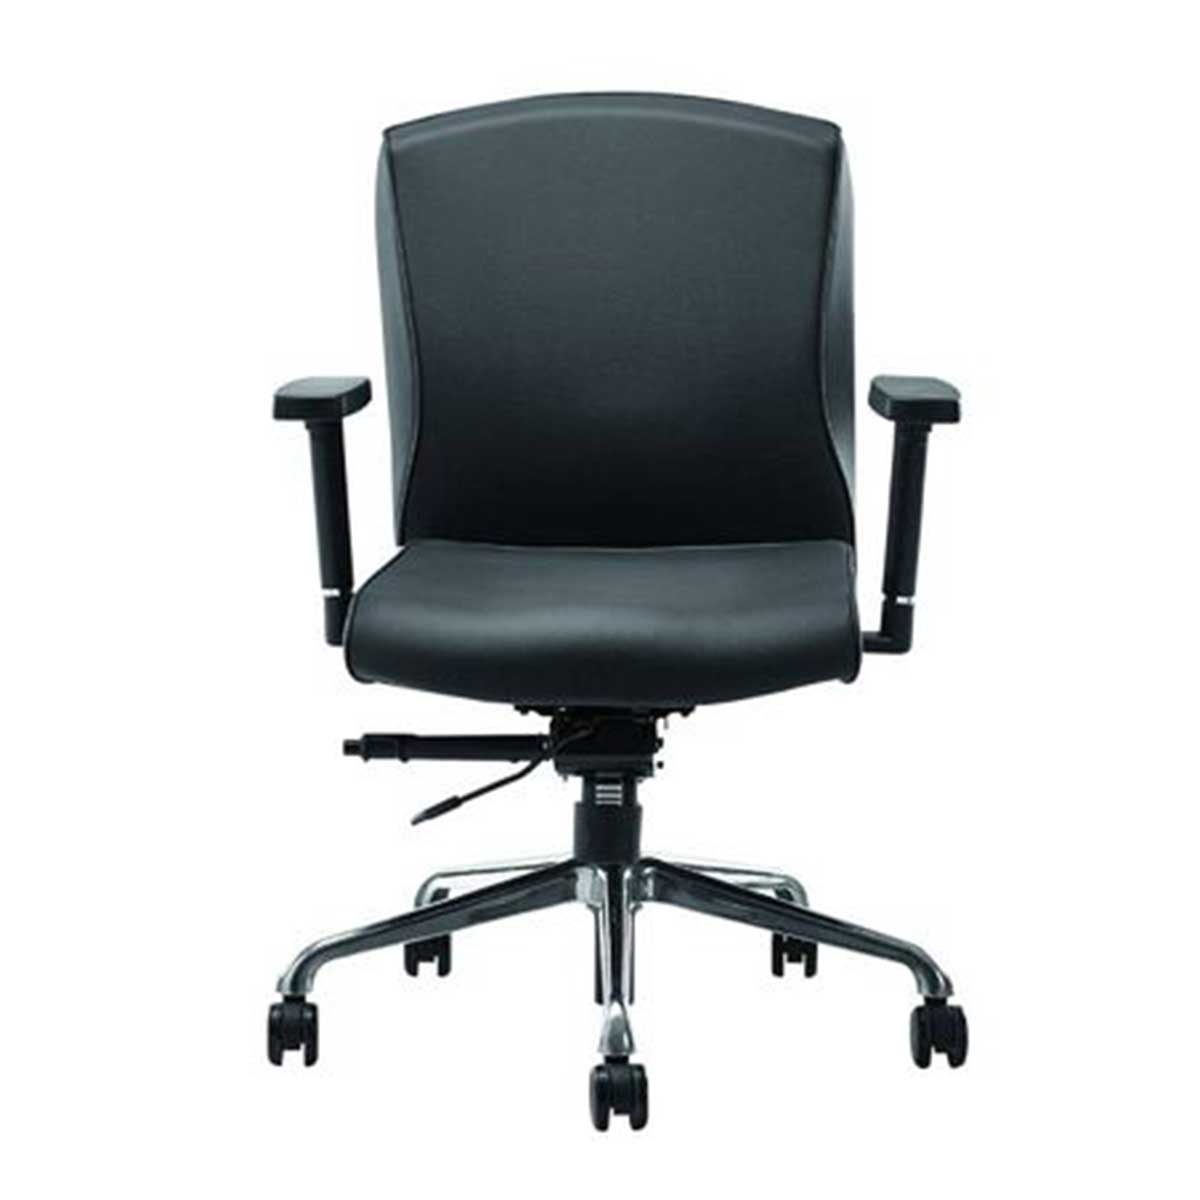 Low Back Office Chair Manufacturers, Suppliers in Rohini Extension